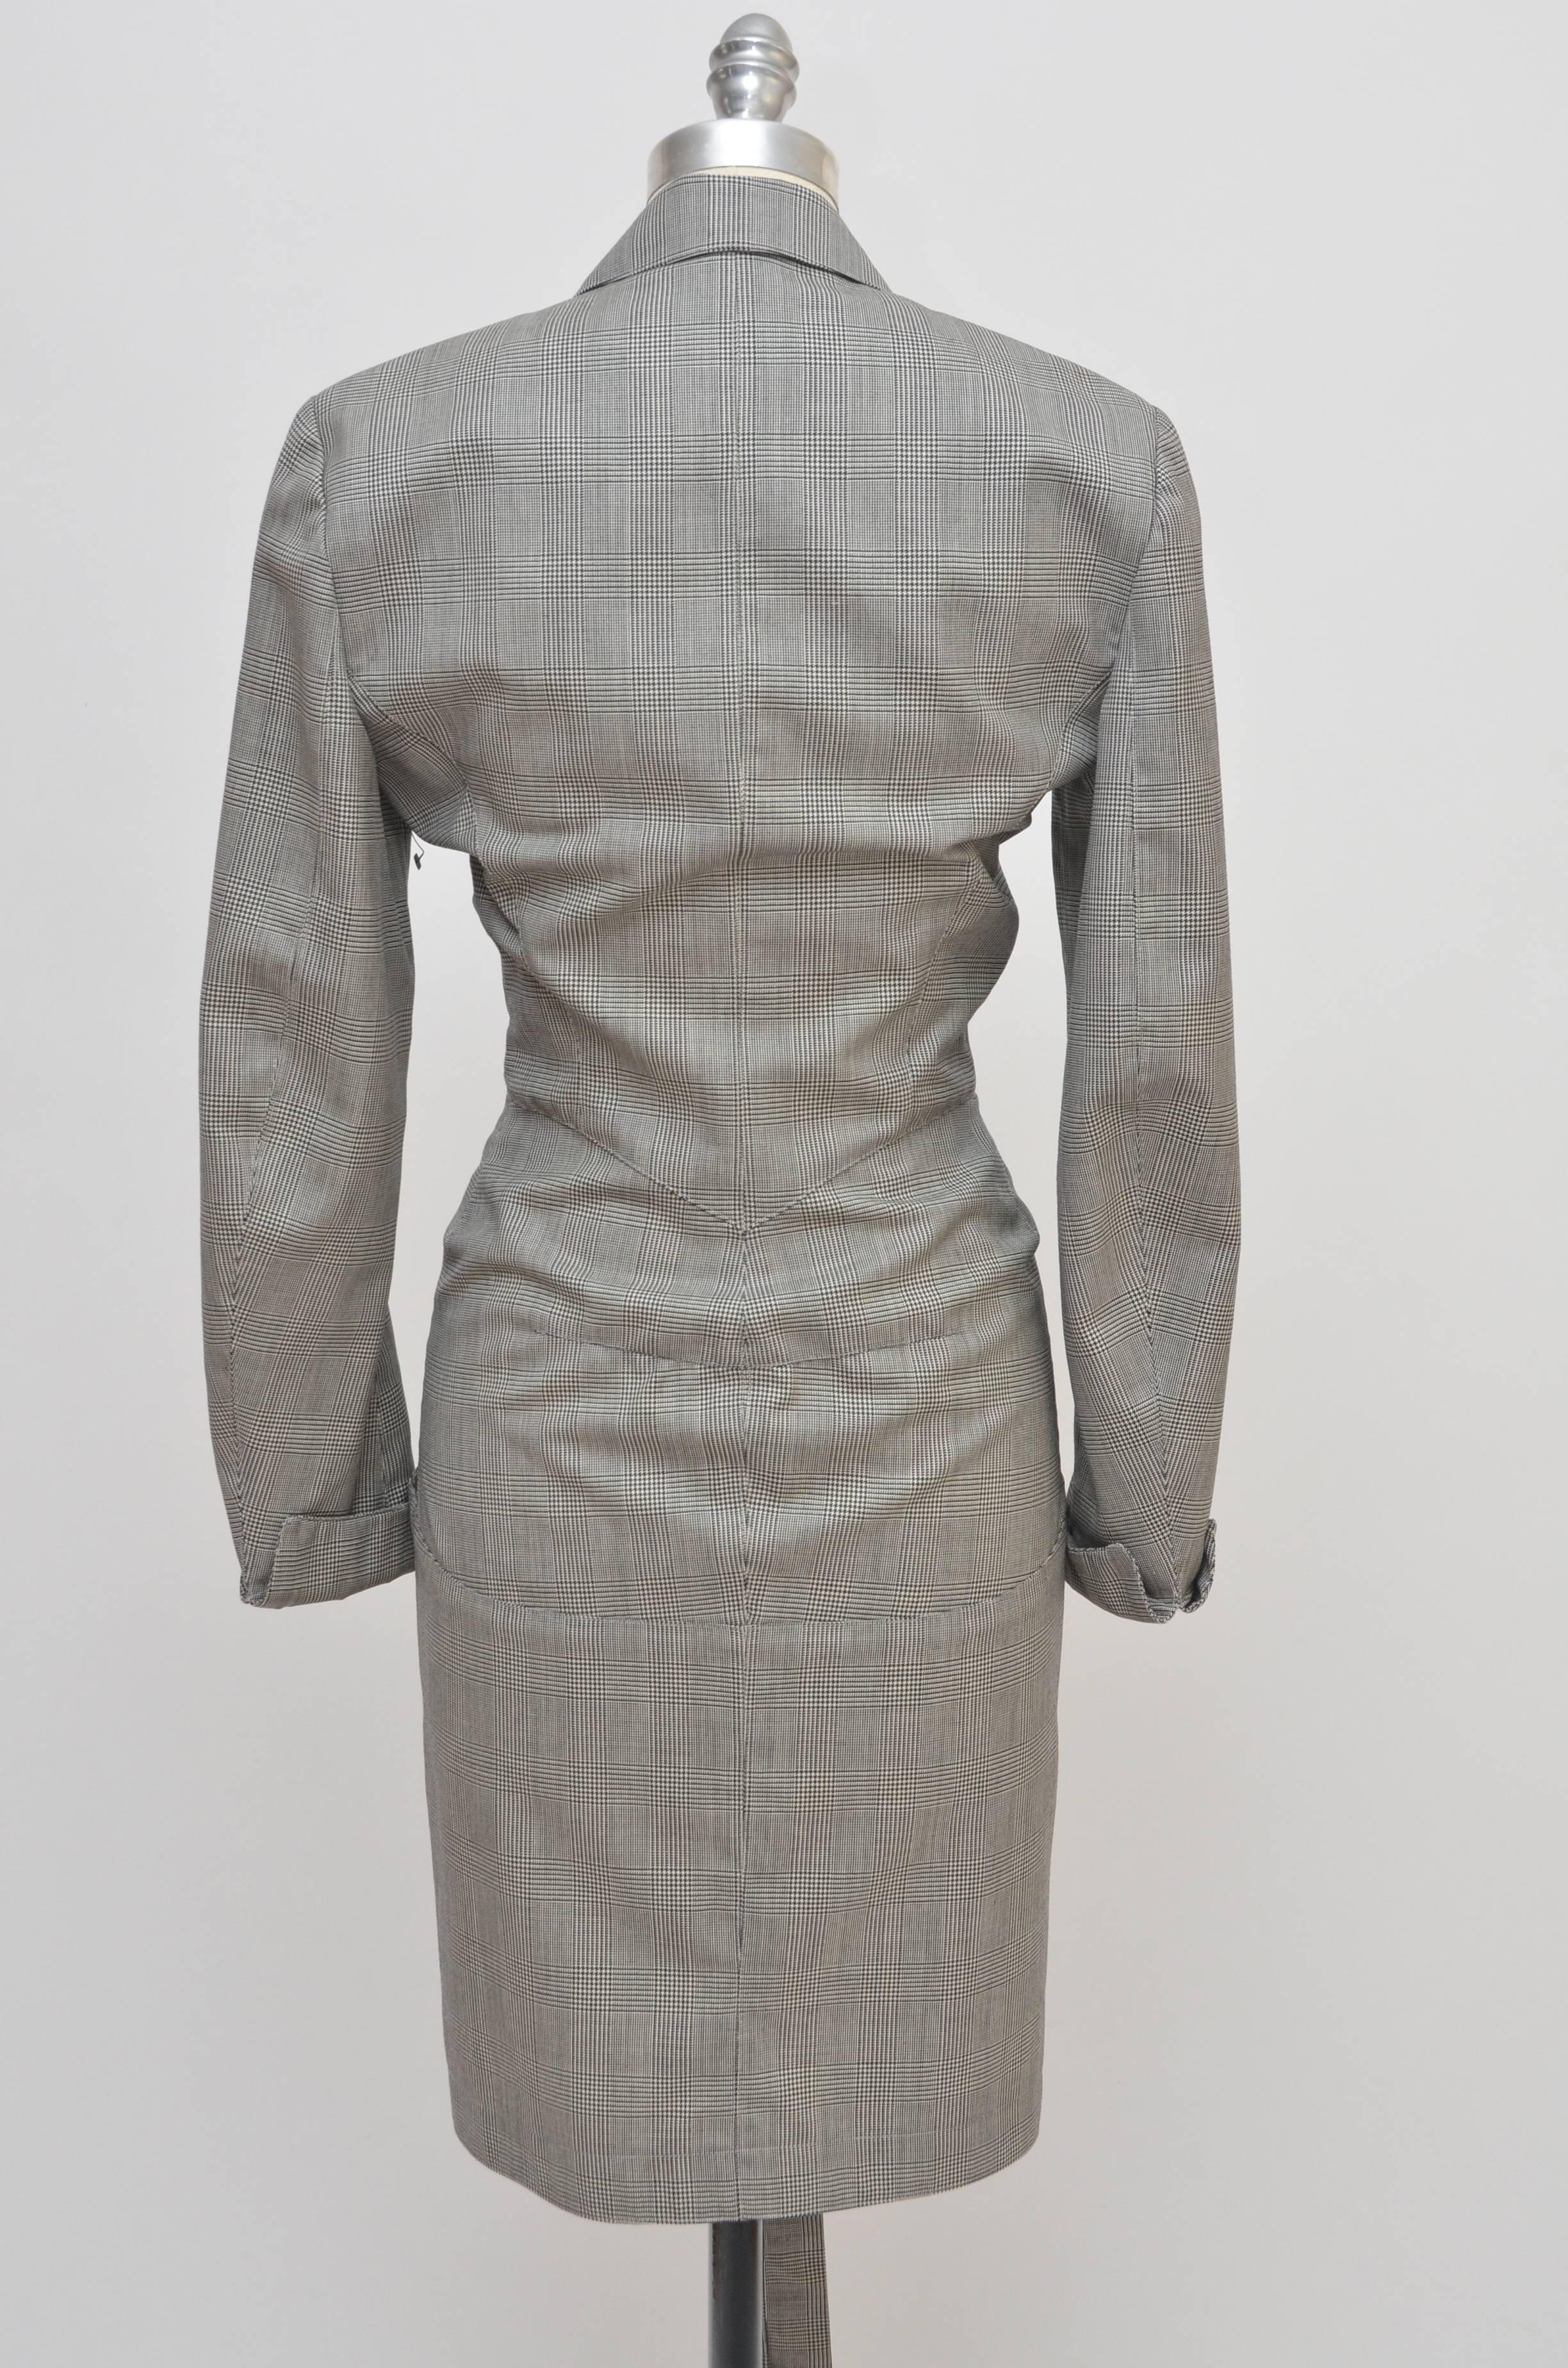 Rare Alaia wool mini dress photographed  on Naomi Campbell with Alaia .
Drawstring fastening, two front pockets one on the top, pointed collar and double button closures. 
Autumn Winter 1988
Excellent mint vintage condition.No holes, rips or stains